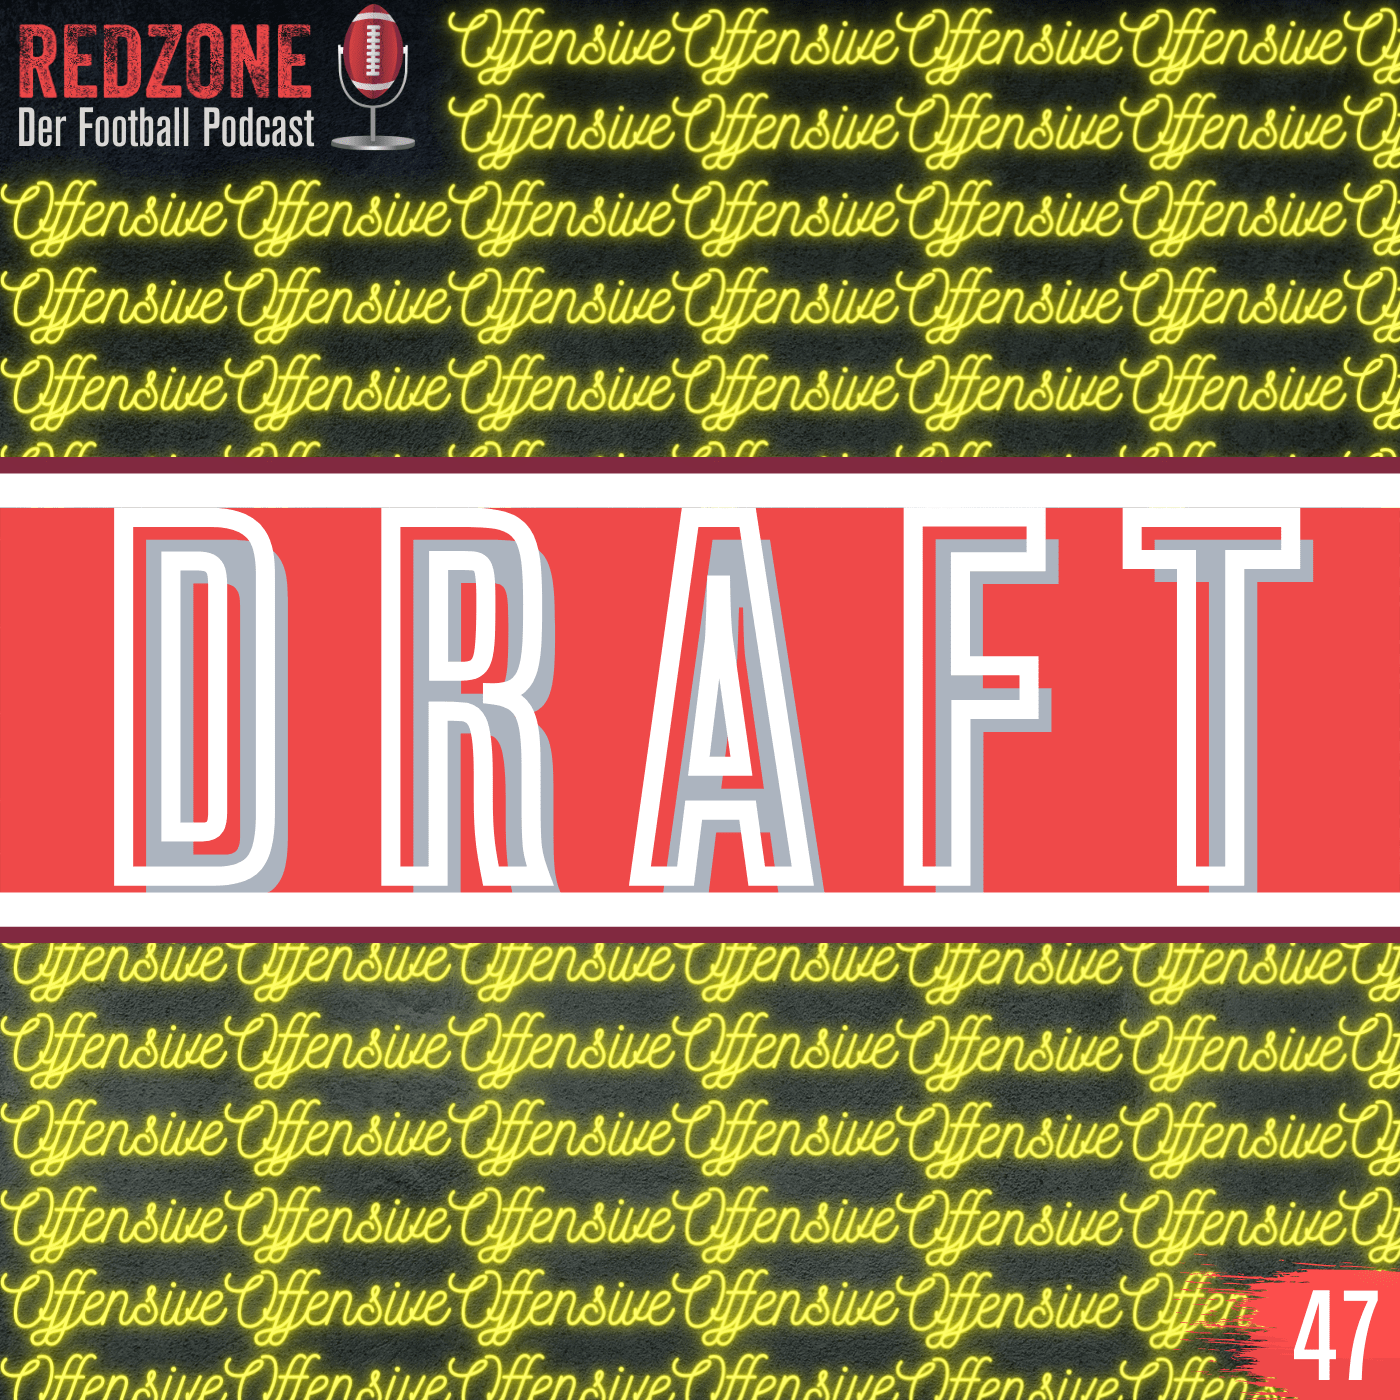 Episode 47: NFL Draft Preview – Offensiv-Talente